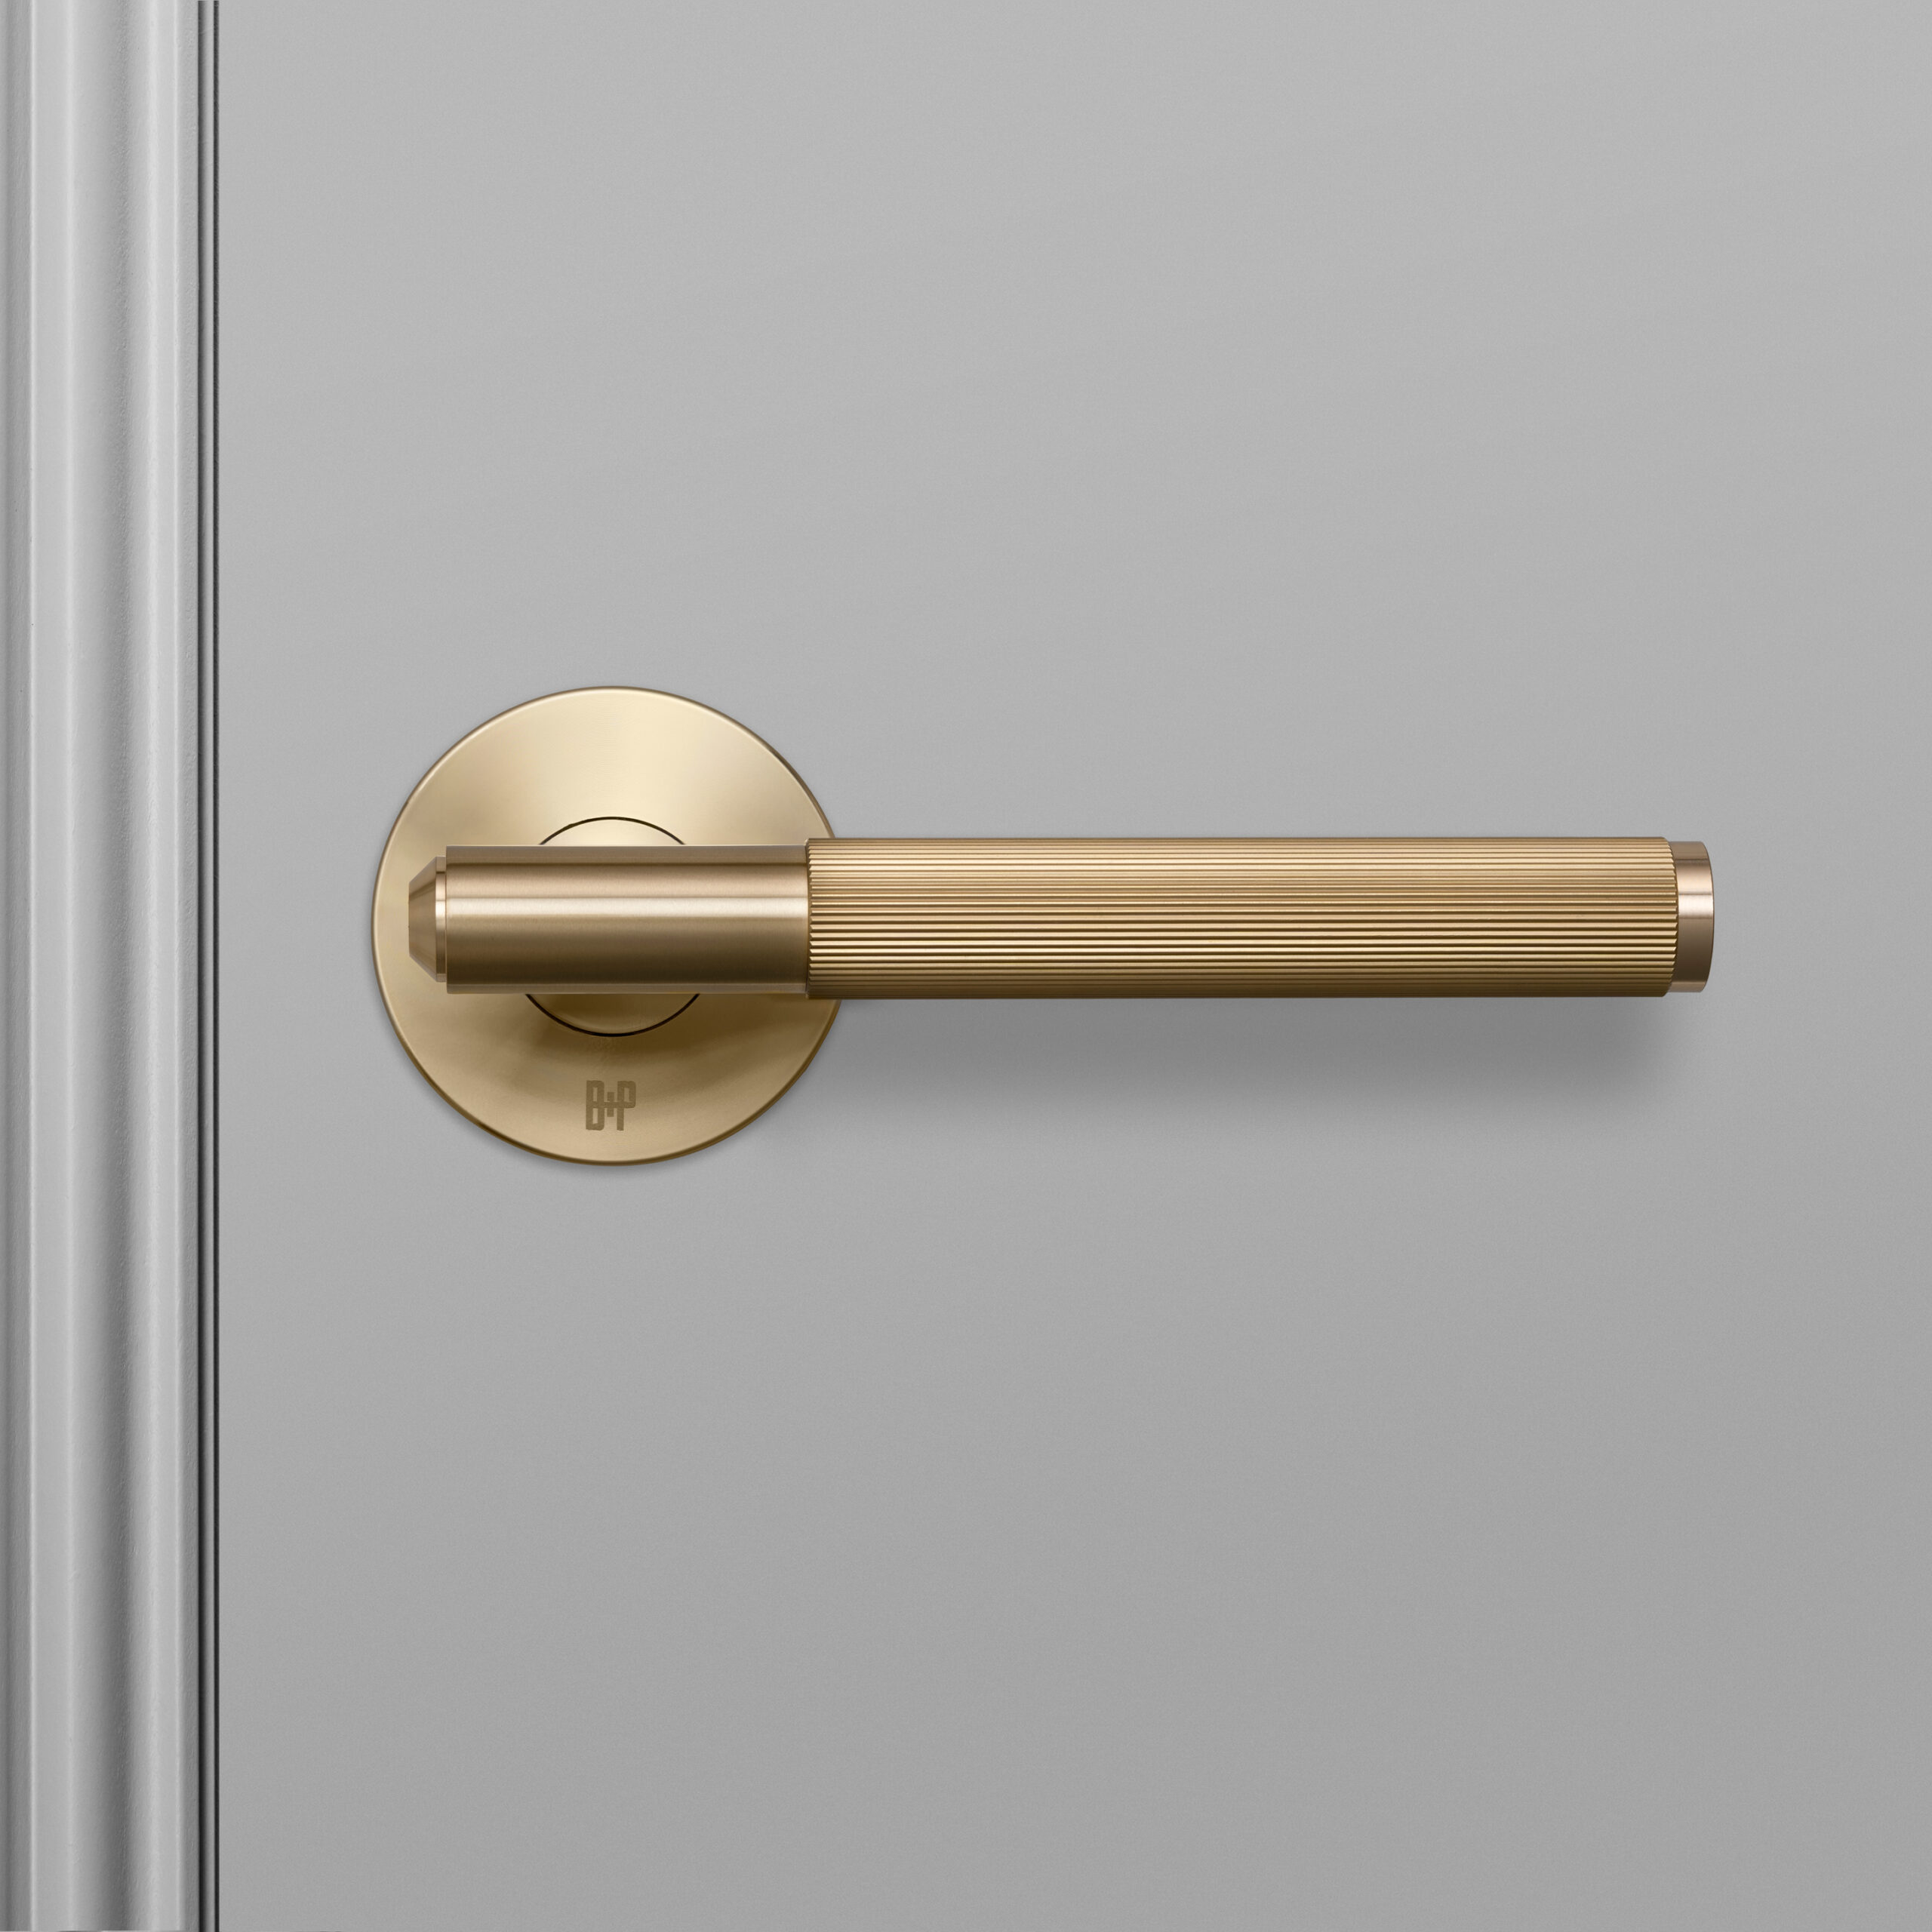 Door-handle_Fixed_Linear_Brass_A2_Web_Square